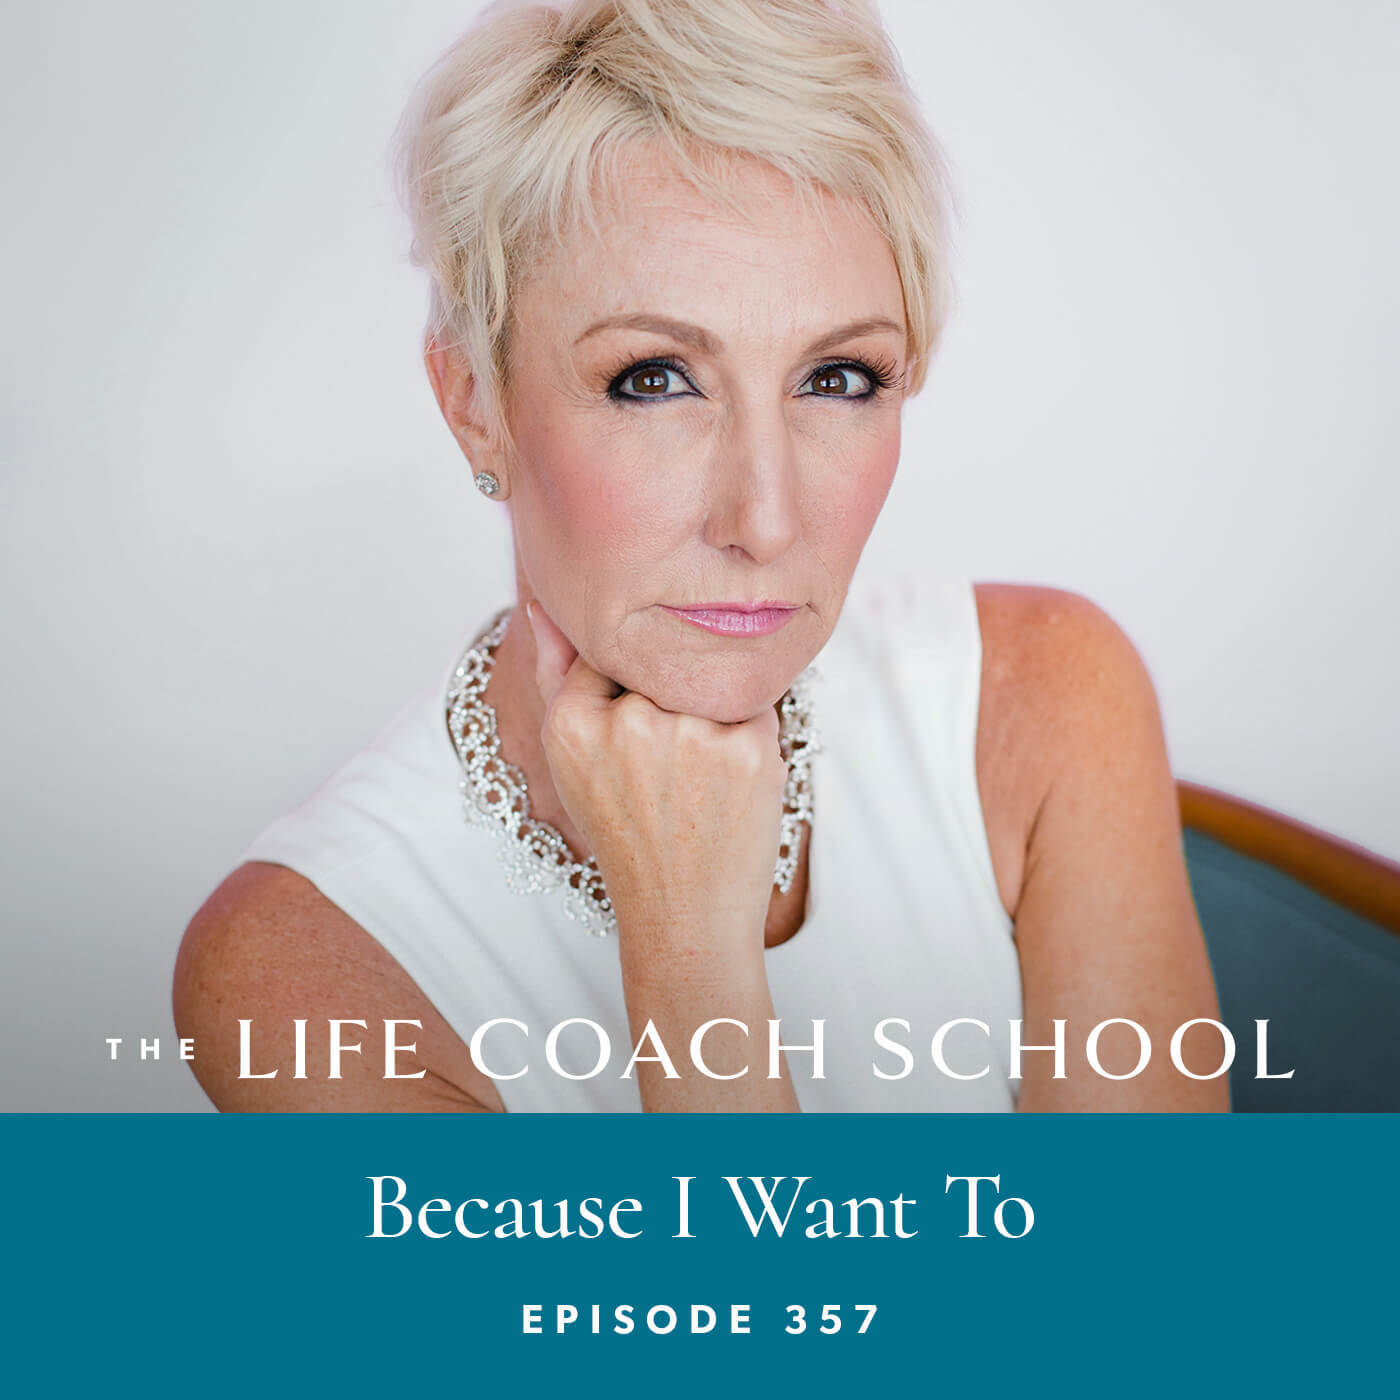 The Life Coach School Podcast with Brooke Castillo | Because I Want To